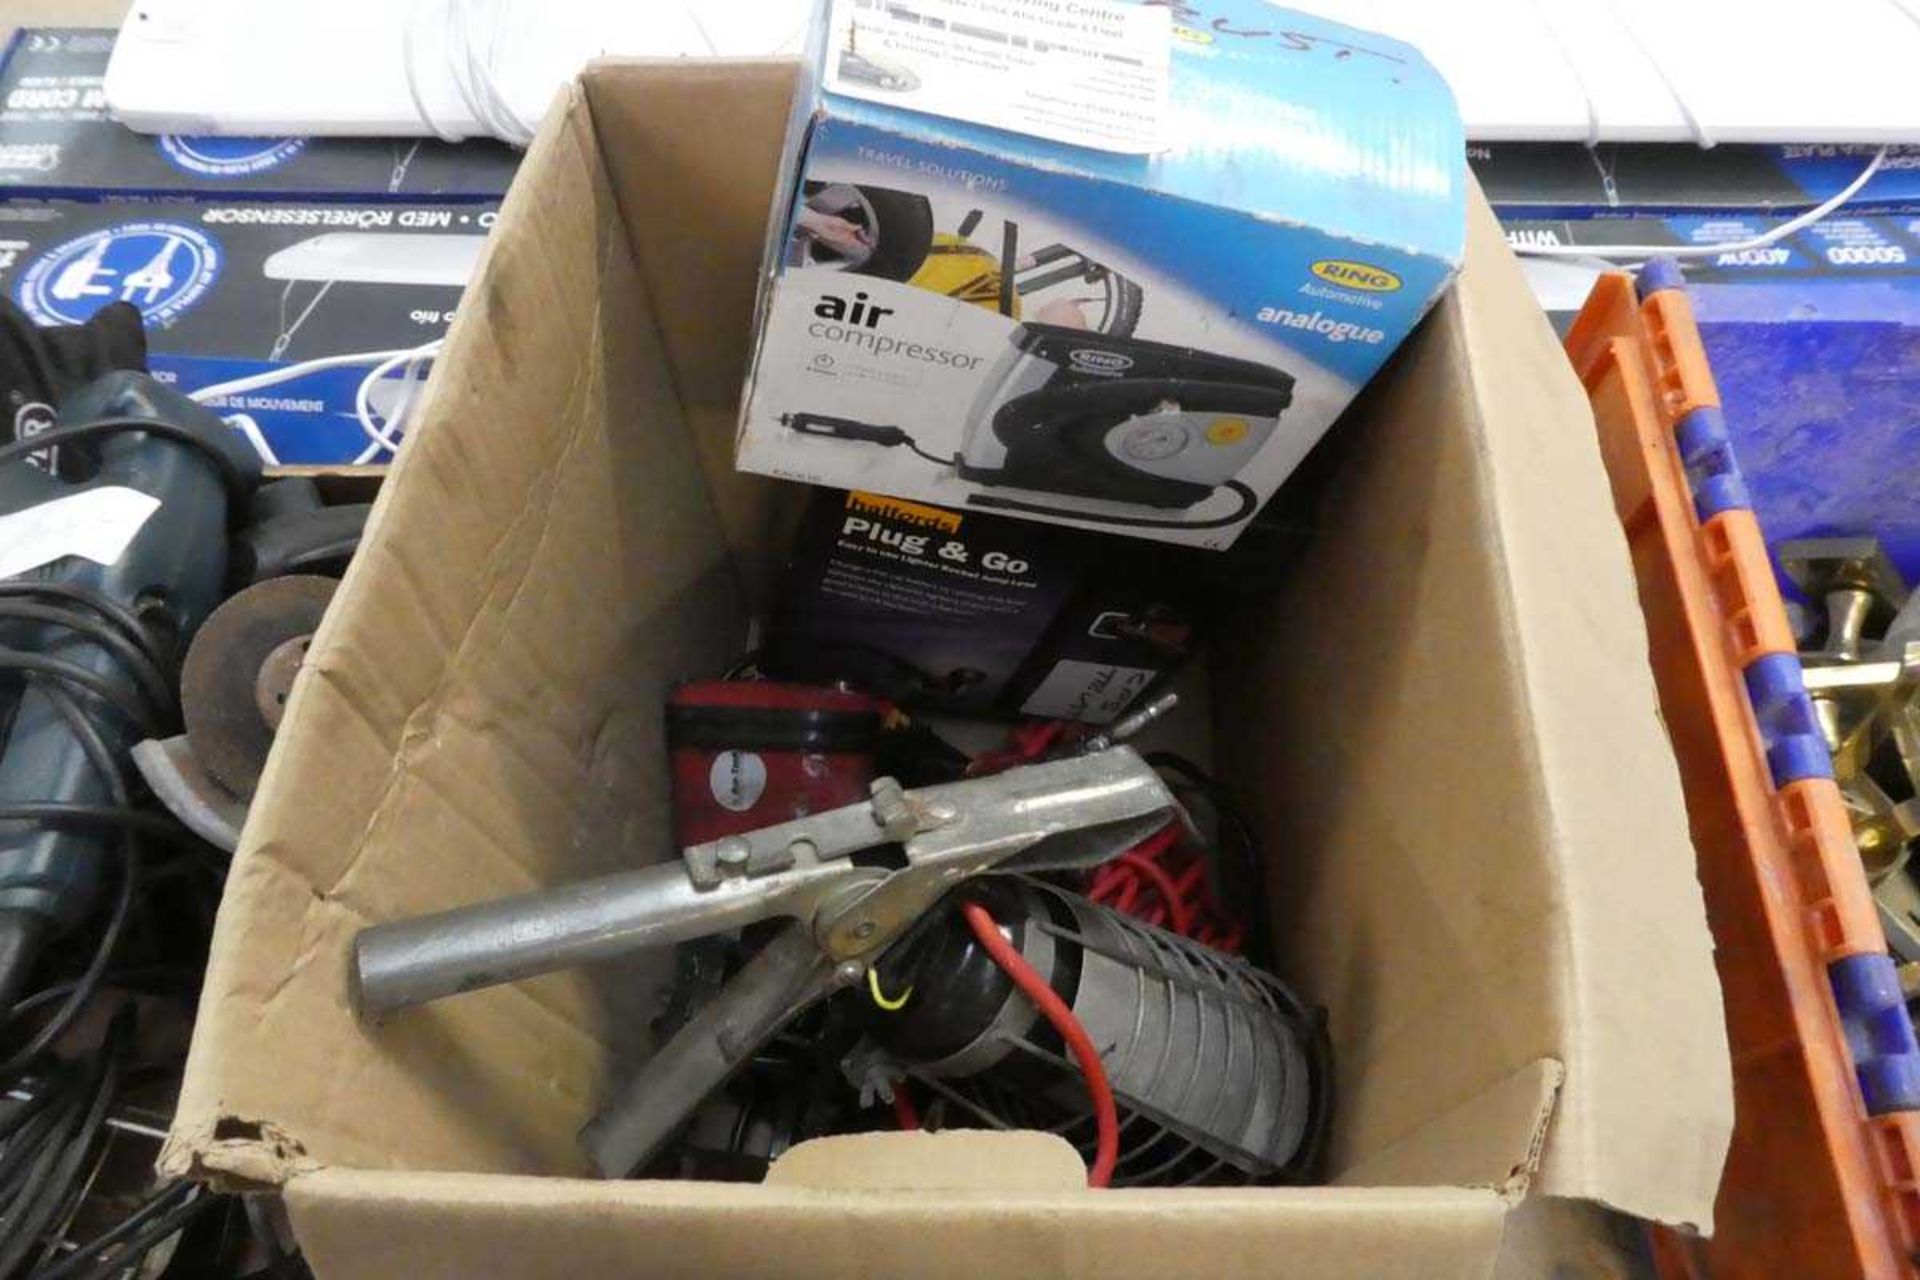 2 boxes containing qty of mixed items to include 240v power tools: sander, angle grinder, drill, - Image 3 of 3